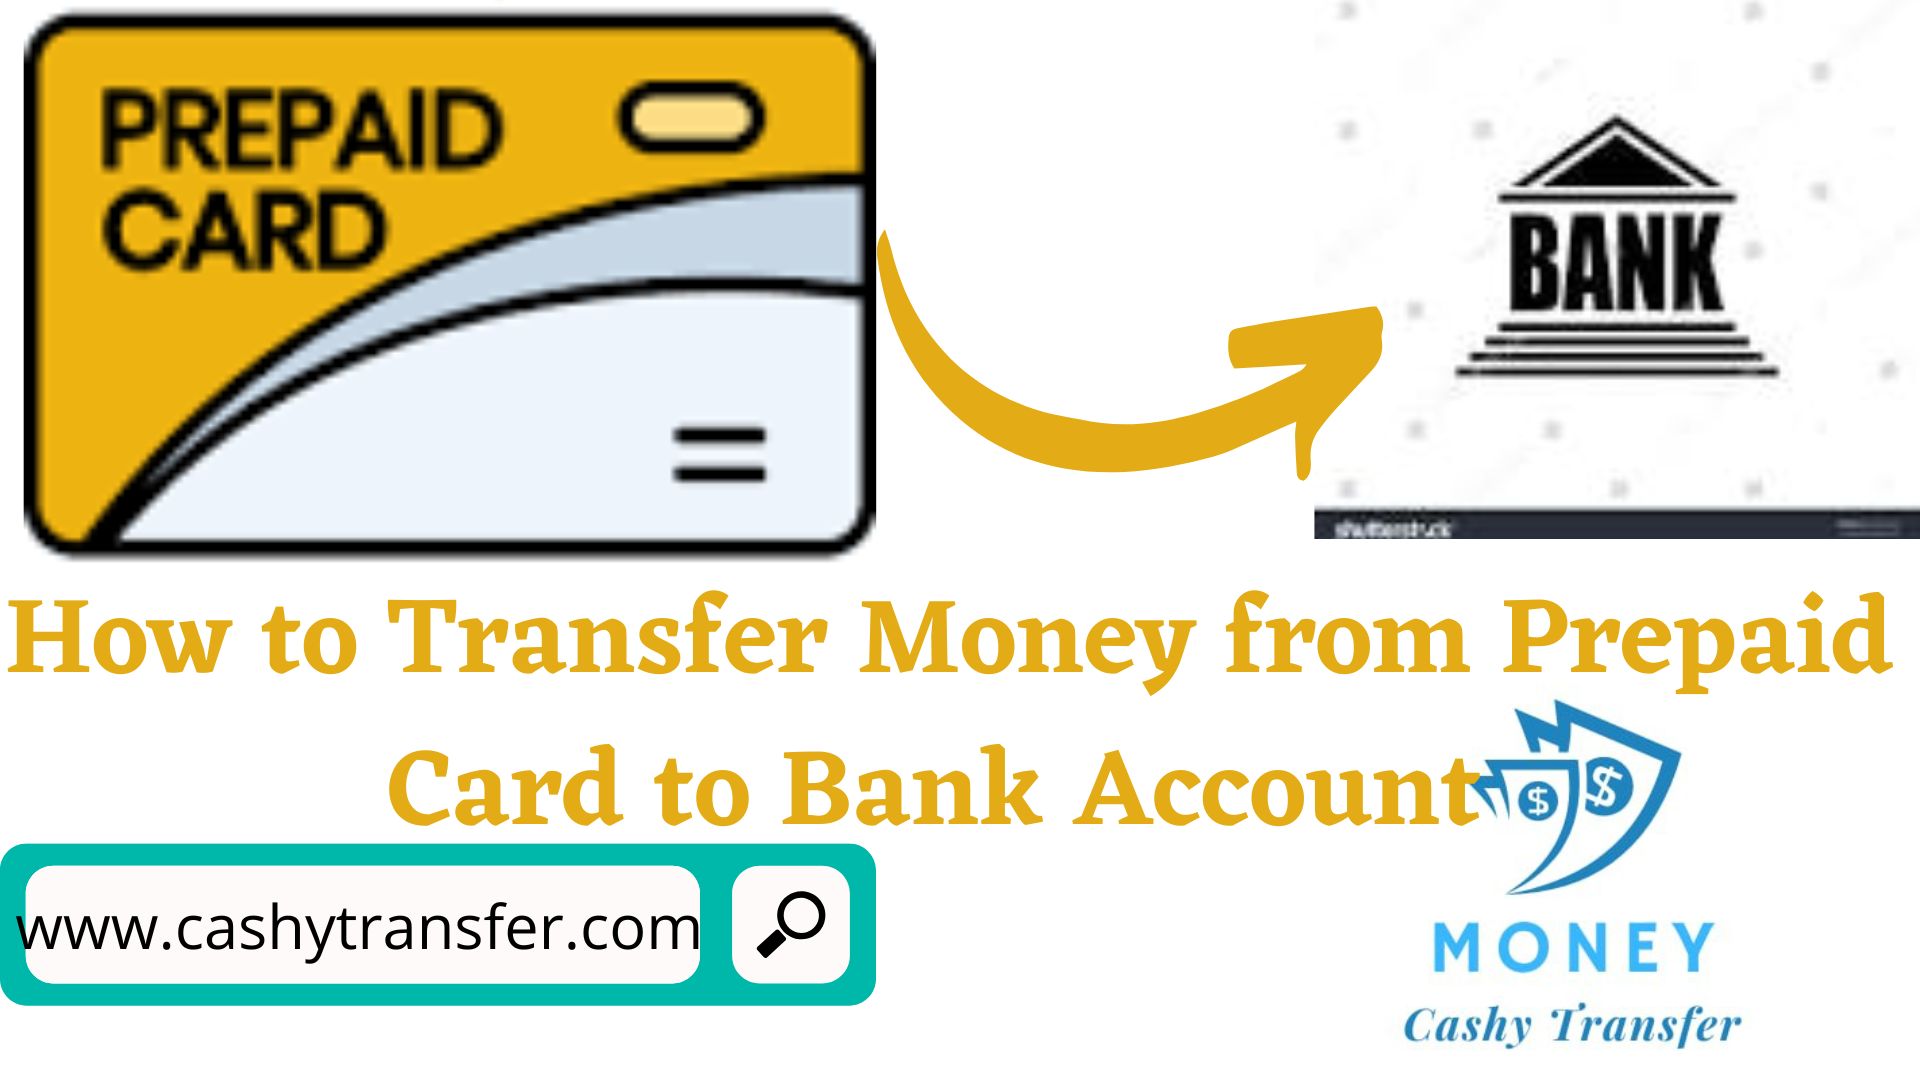 Transfer Money from Prepaid Card to Bank Account